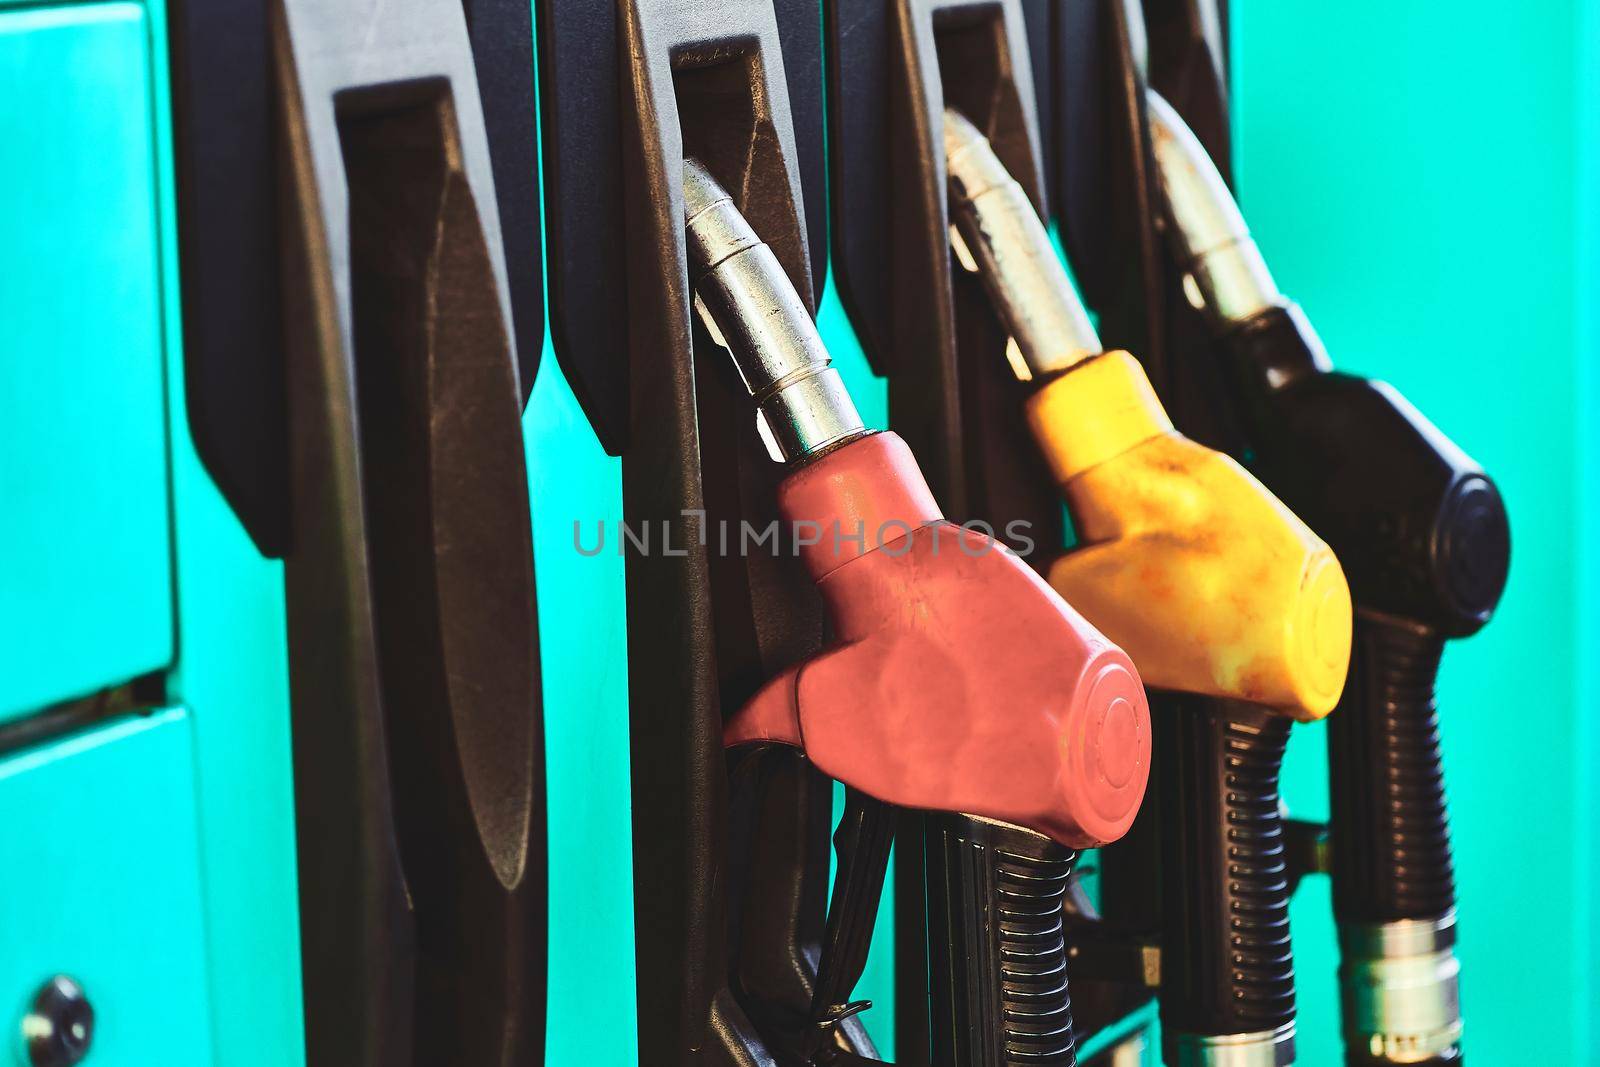 A filling station is a facility that sells fuel and engine lubricants for motor vehicles. A refueling gun wakes up a car at a gas station.